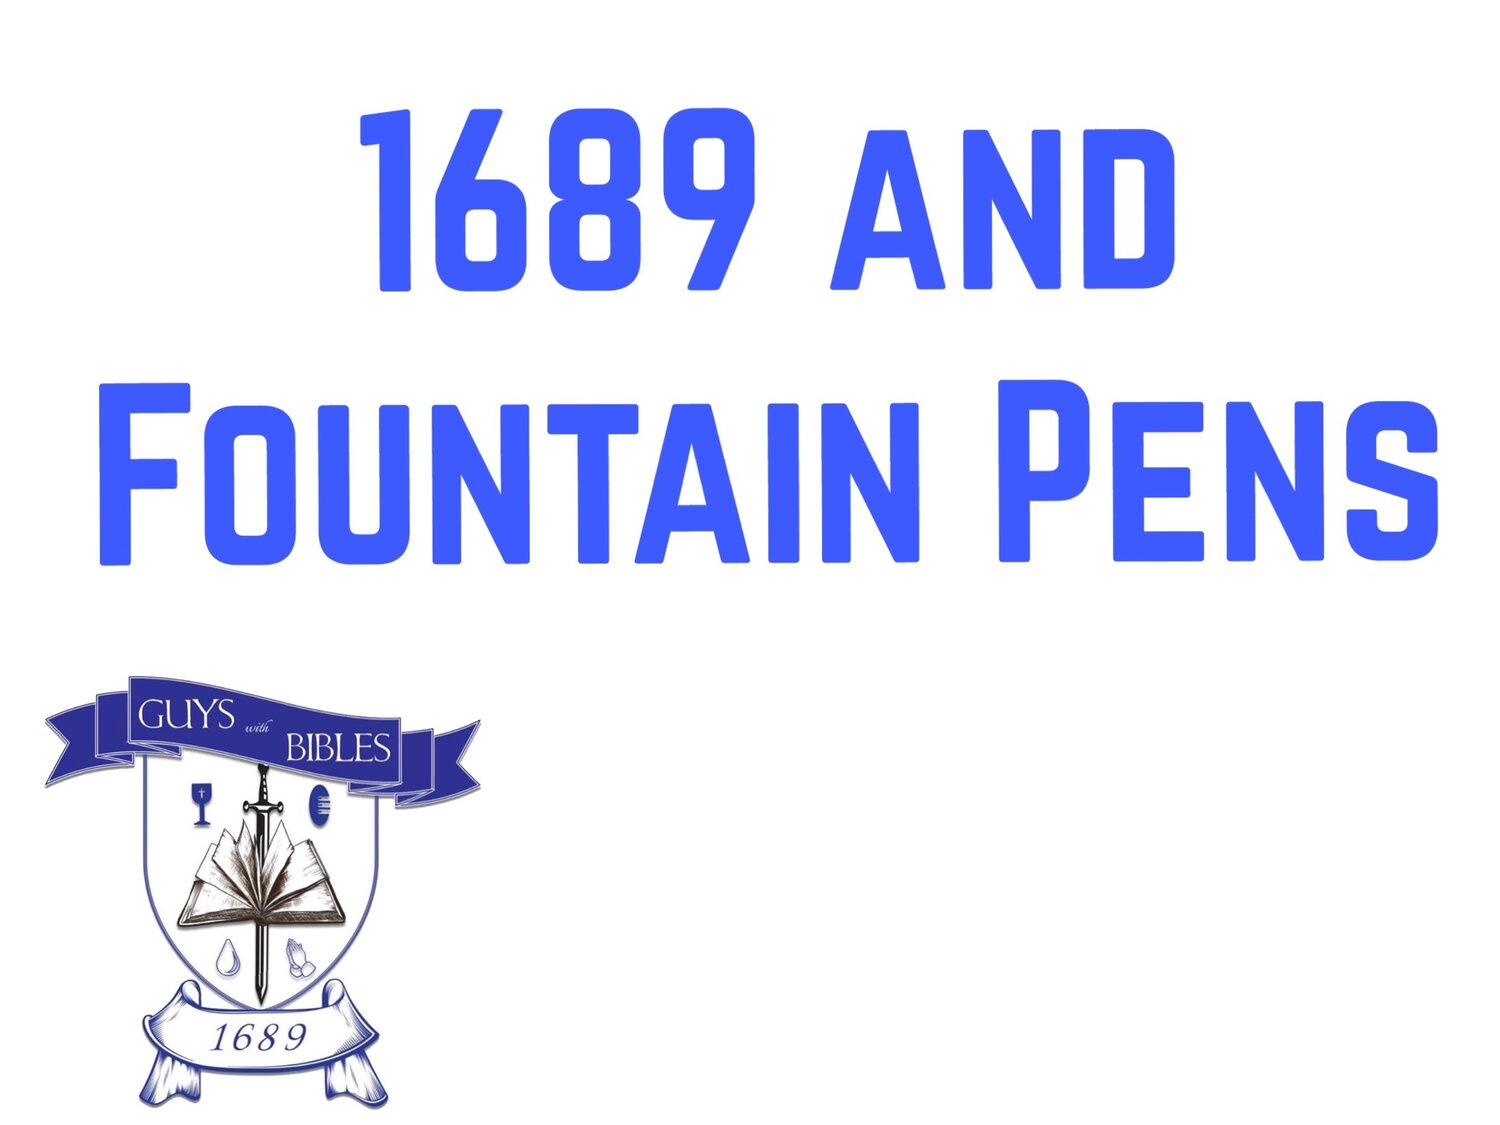 1689 and Fountain Pens